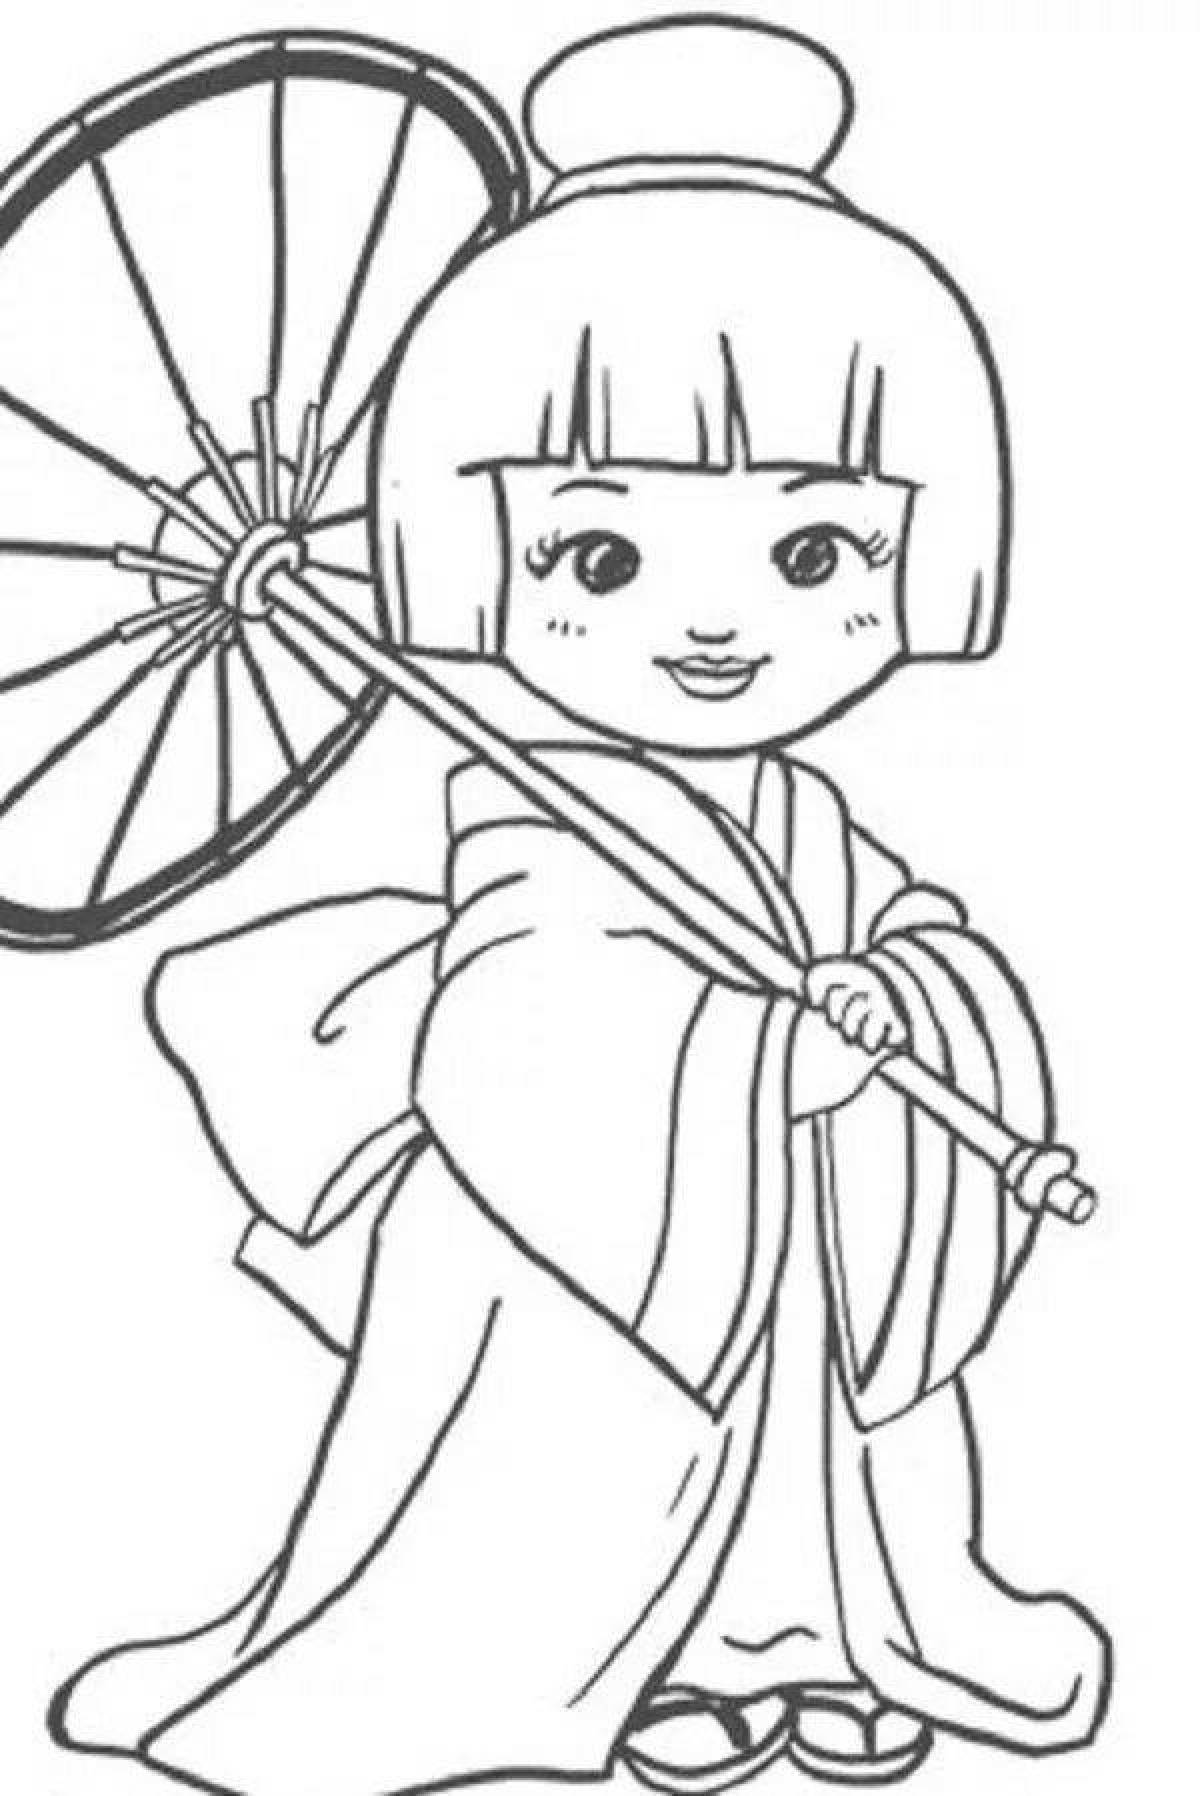 Delightful Japanese coloring book